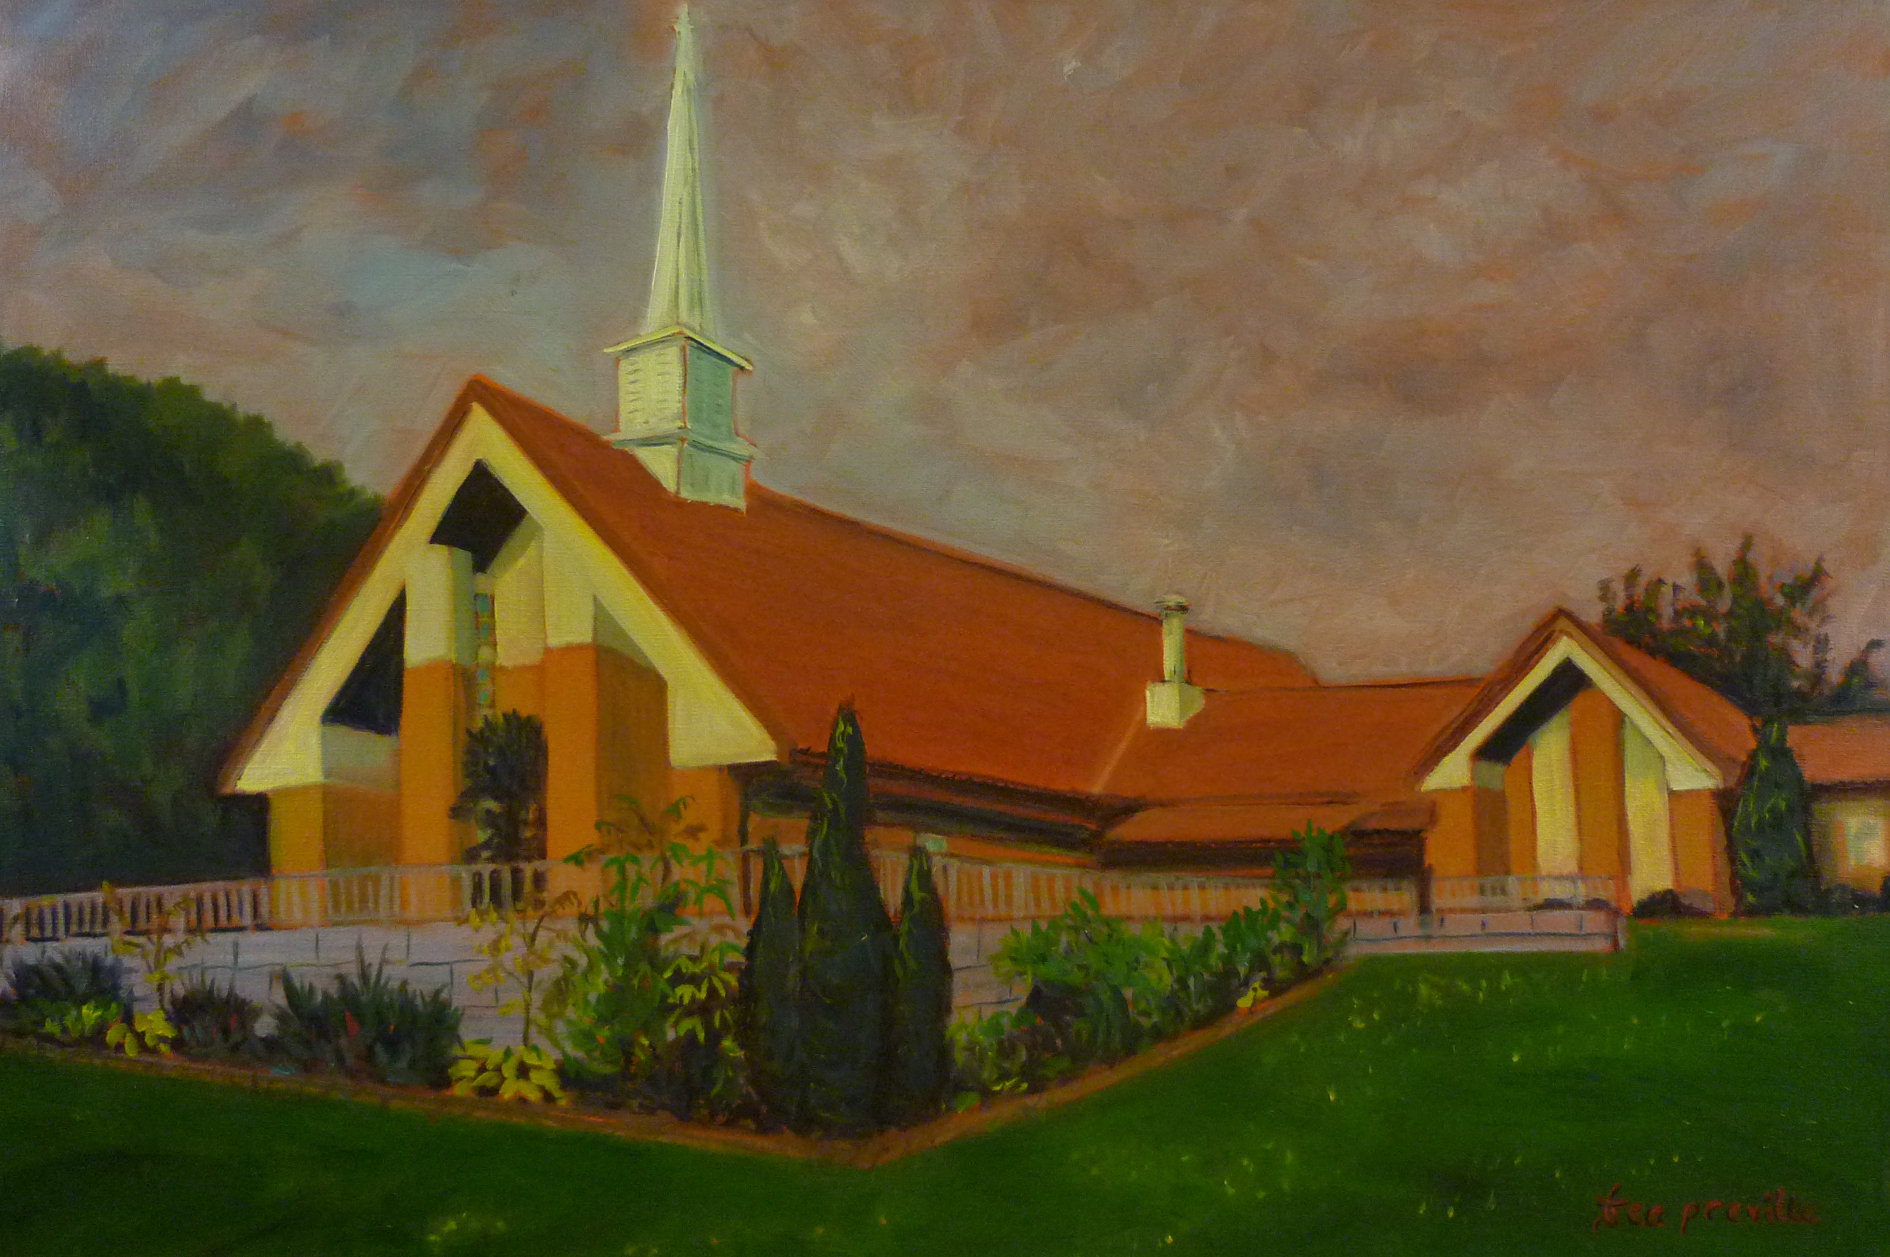 Church of Jesus Christ of Latter Day Saints Nelson, BC by Tea Preville